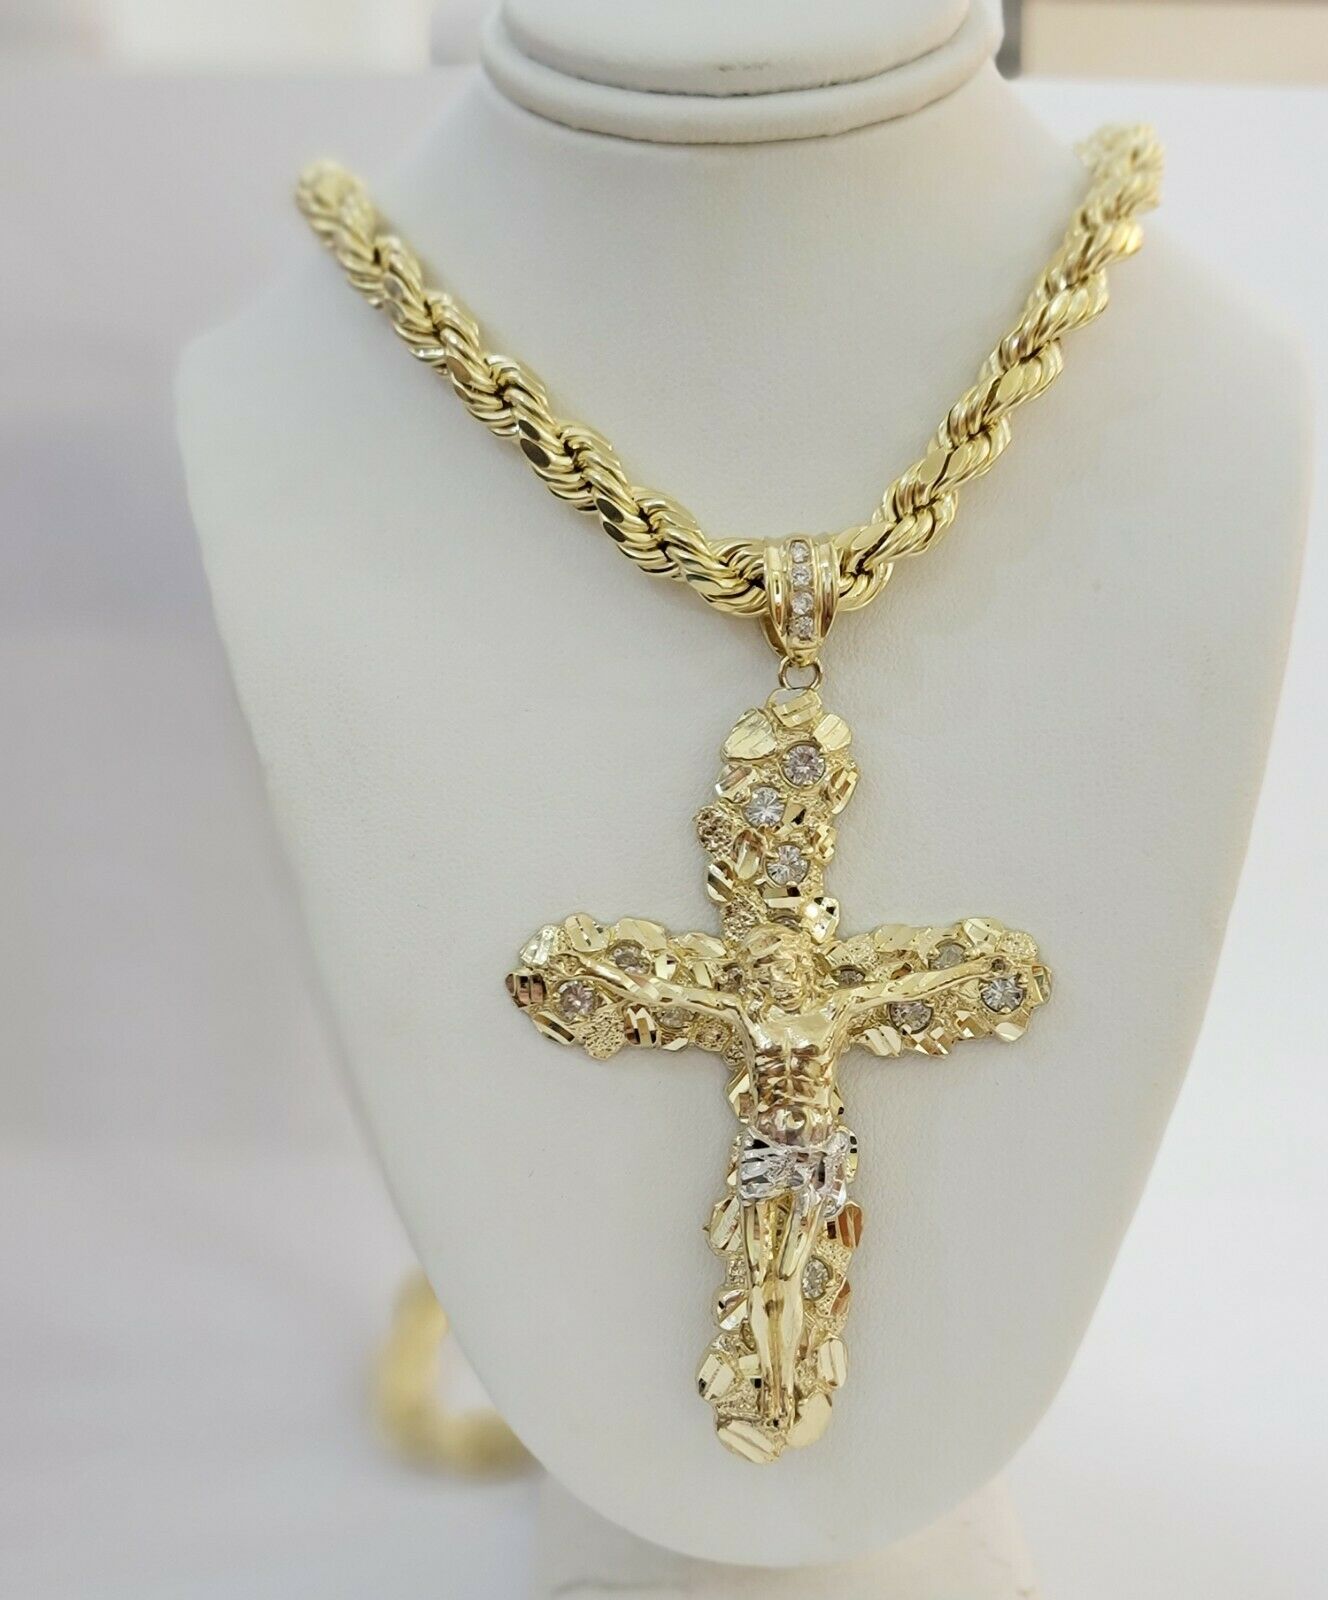 10k Gold Rope Chain & Cross Charm Pendant Mens 10kt Yellow Gold 8mm 26